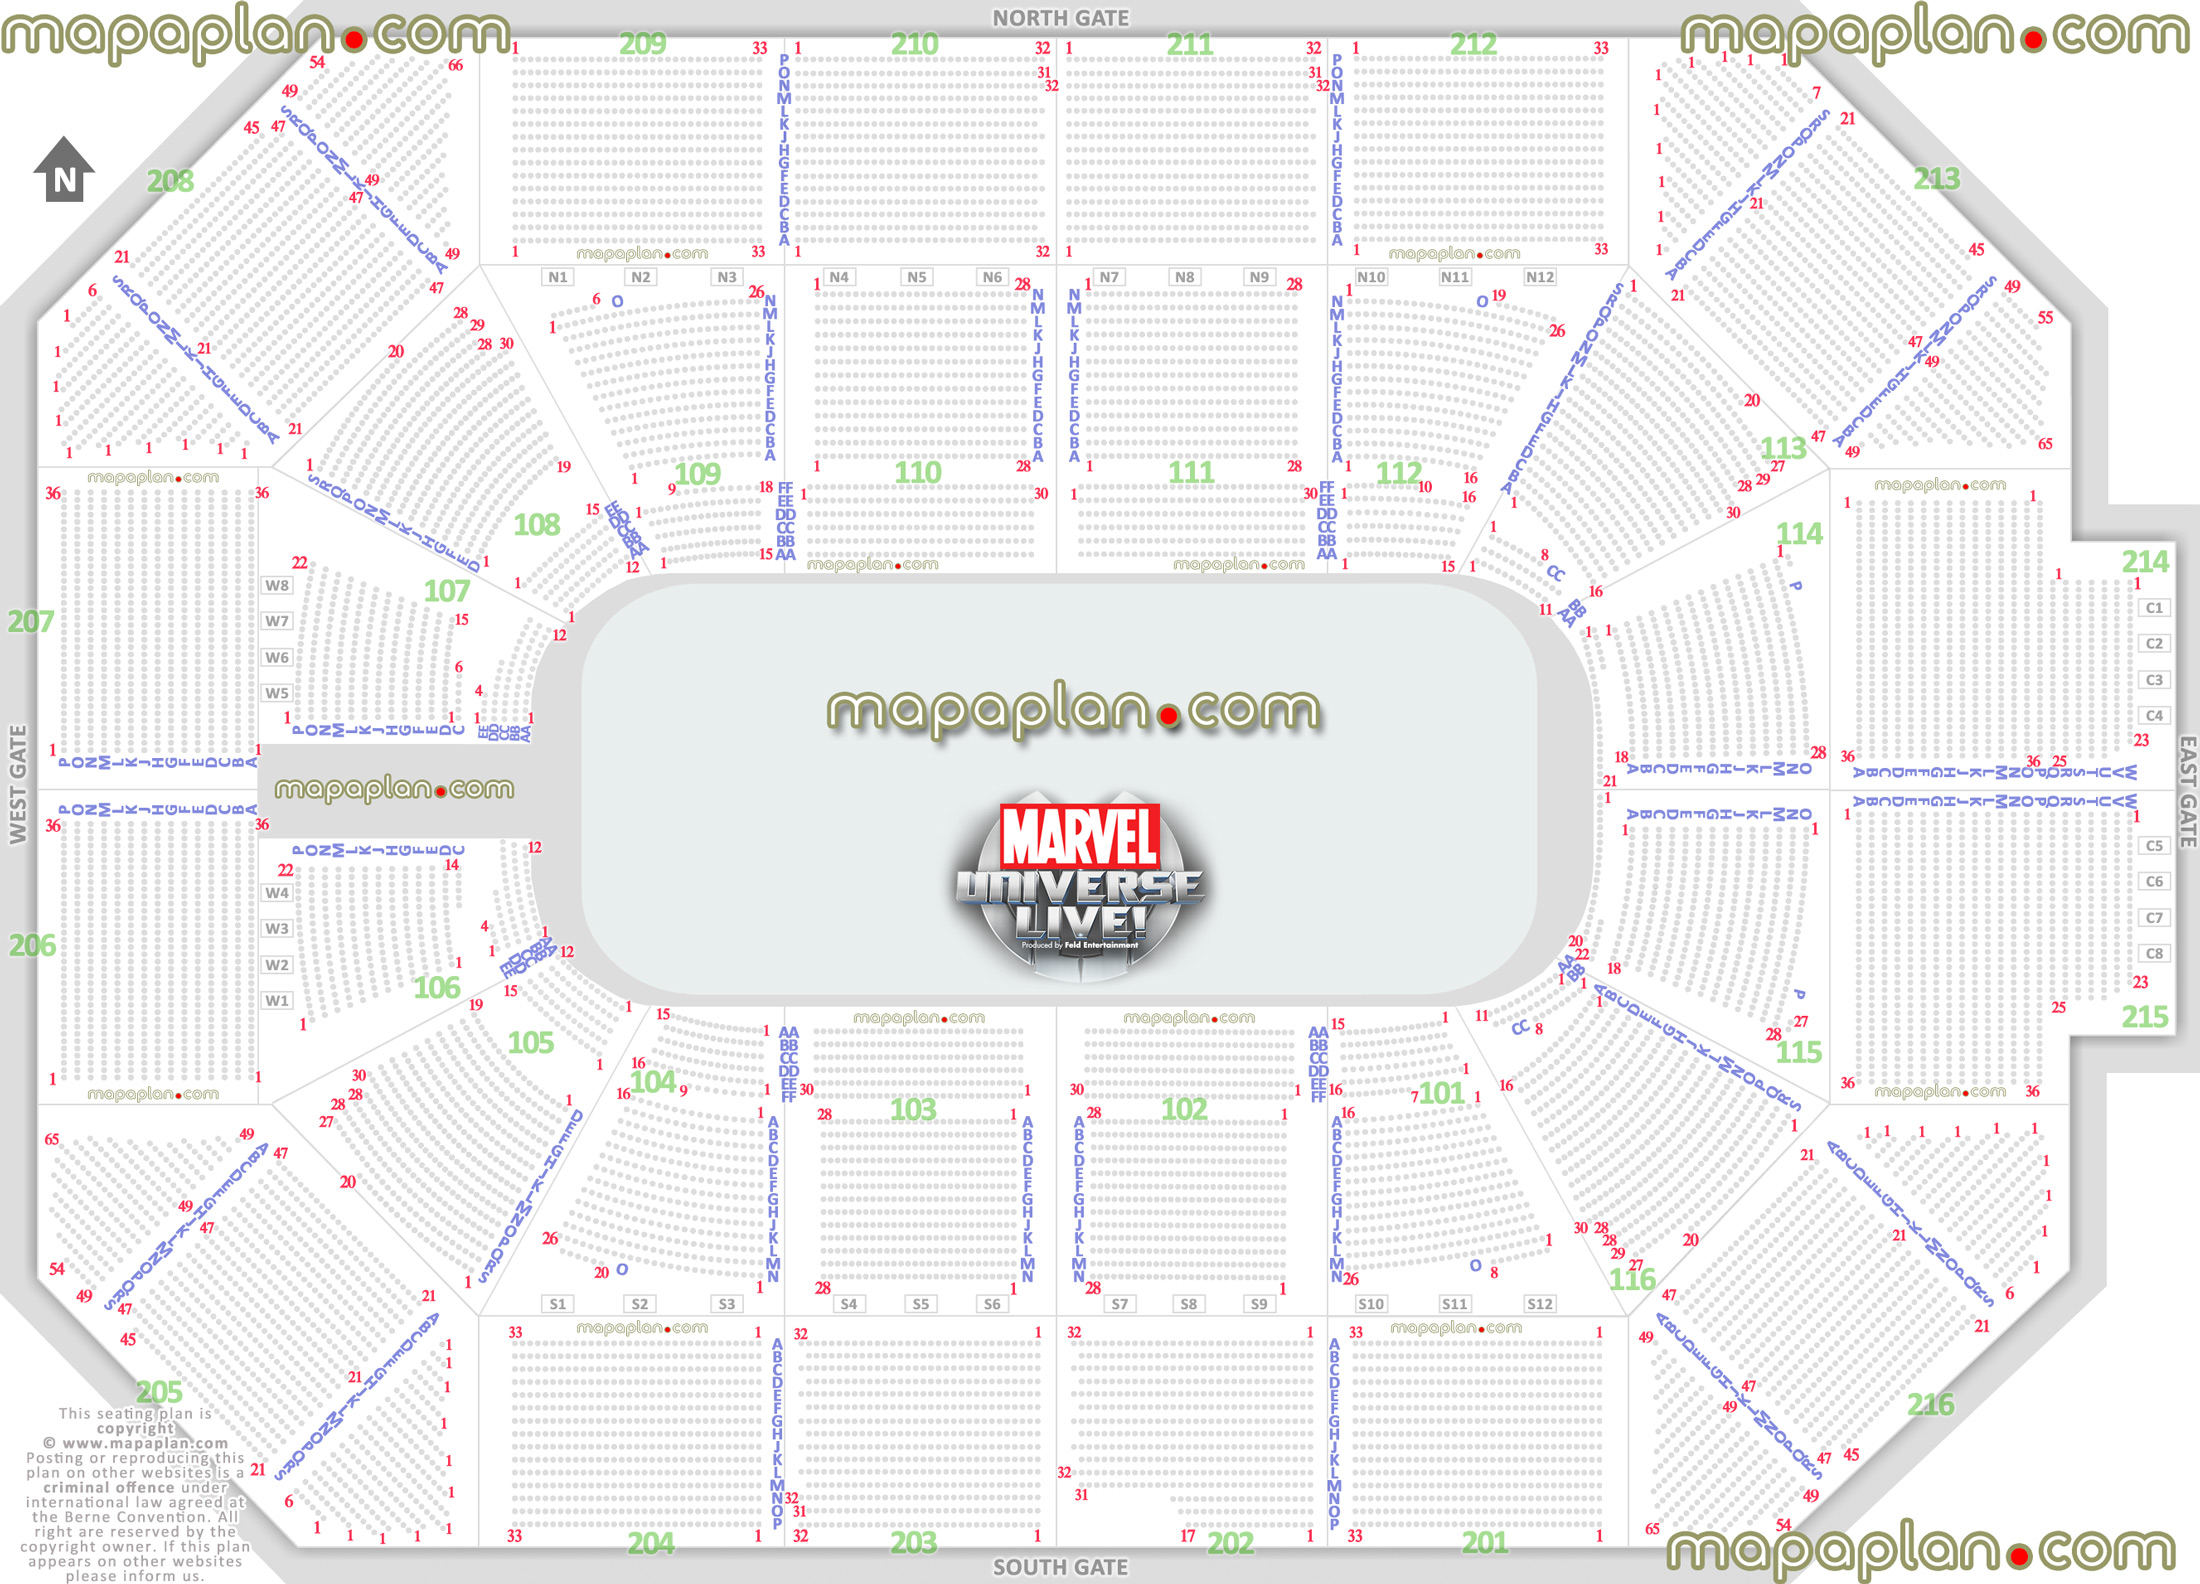 marvel universe live new show interactive best seat selection arrangement review diagram balcony sections 201 202 203 204 205 206 207 208 209 210 211 212 213 214 215 216 Rosemont Allstate Arena seating chart